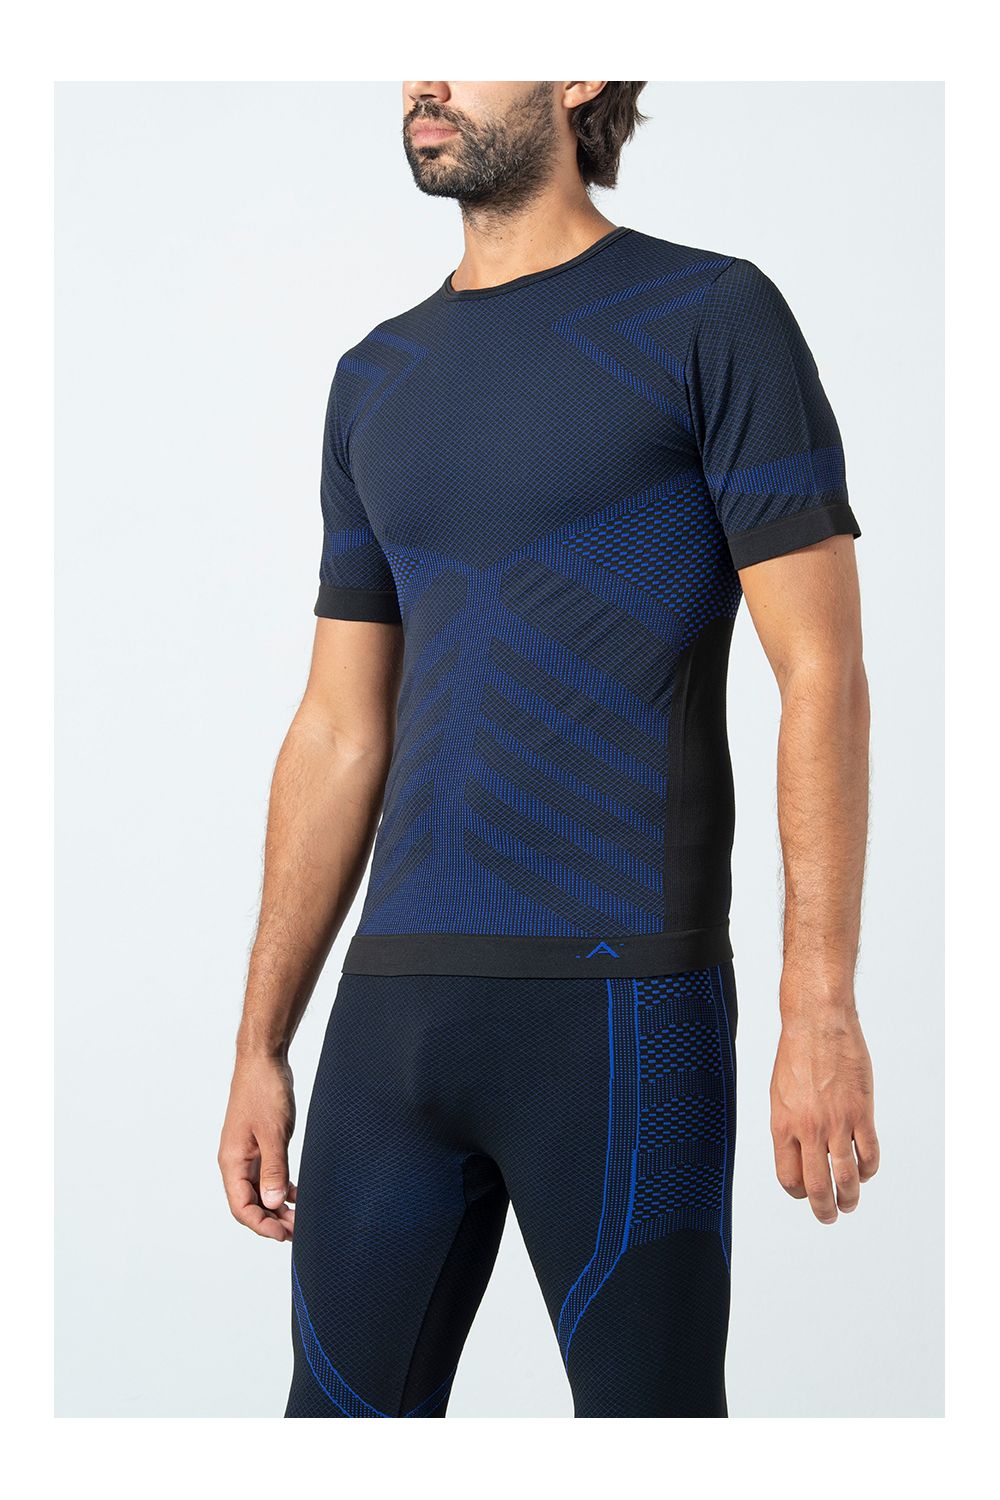 Men's Sports T-Shirt: Breathable, Energy Thermoregulating